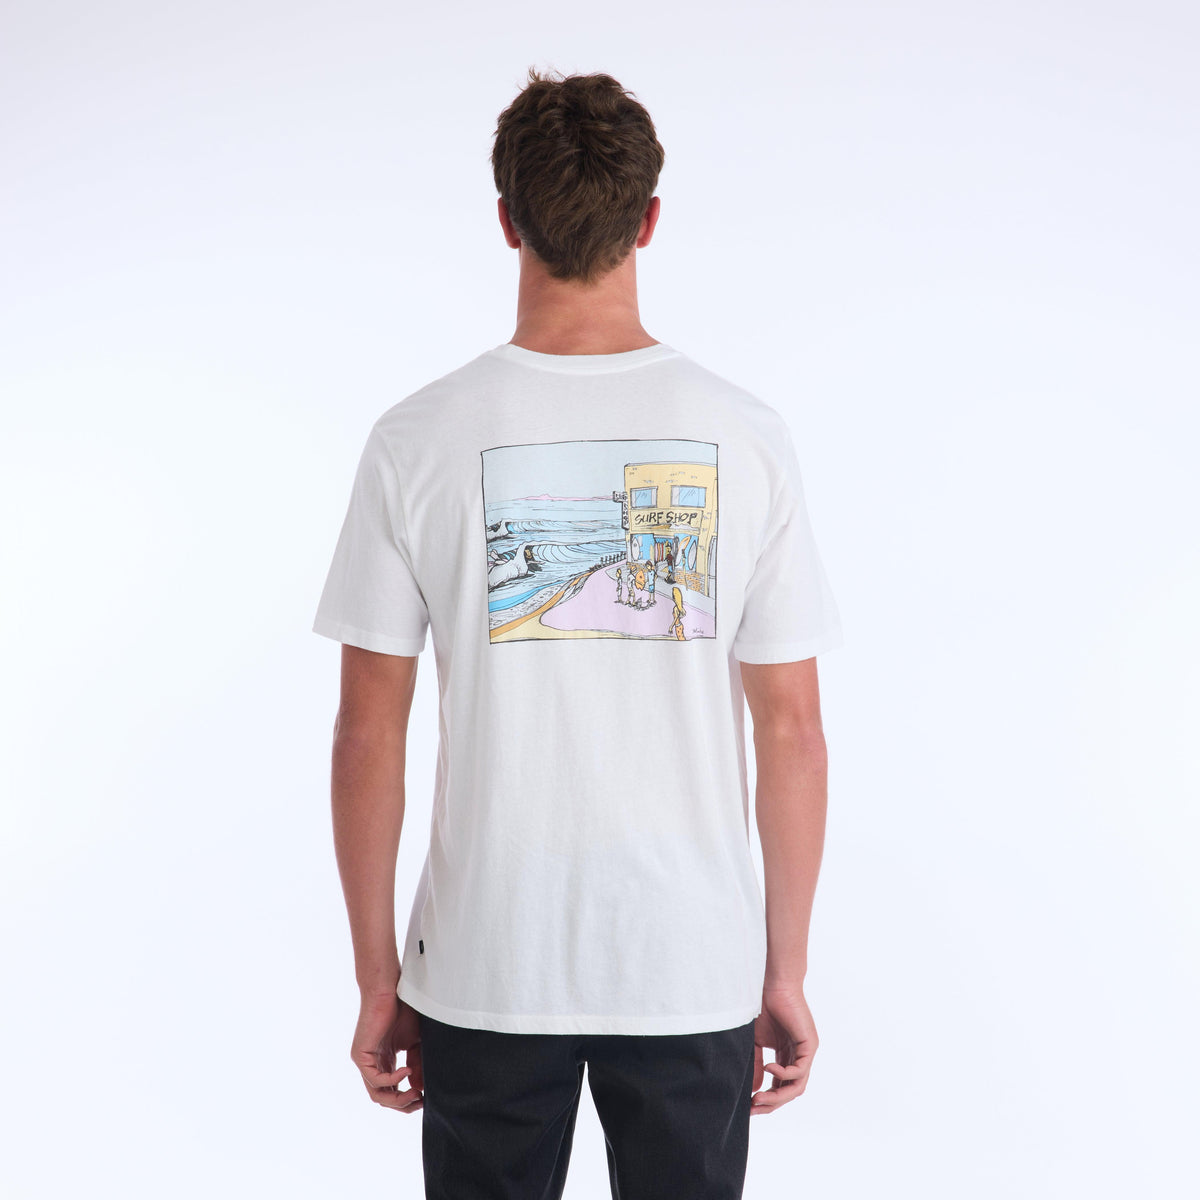 The Surf Shop Super Soft Tee has a left chest front graphic of the IPD logo in black and light blue. The back pictures a hand-drawn depiction of a surf shop across the upper middle back of the shirt. The body color of the shirt is white and the graphic color is multicolored and has a small black side seam label with the IPD logo.